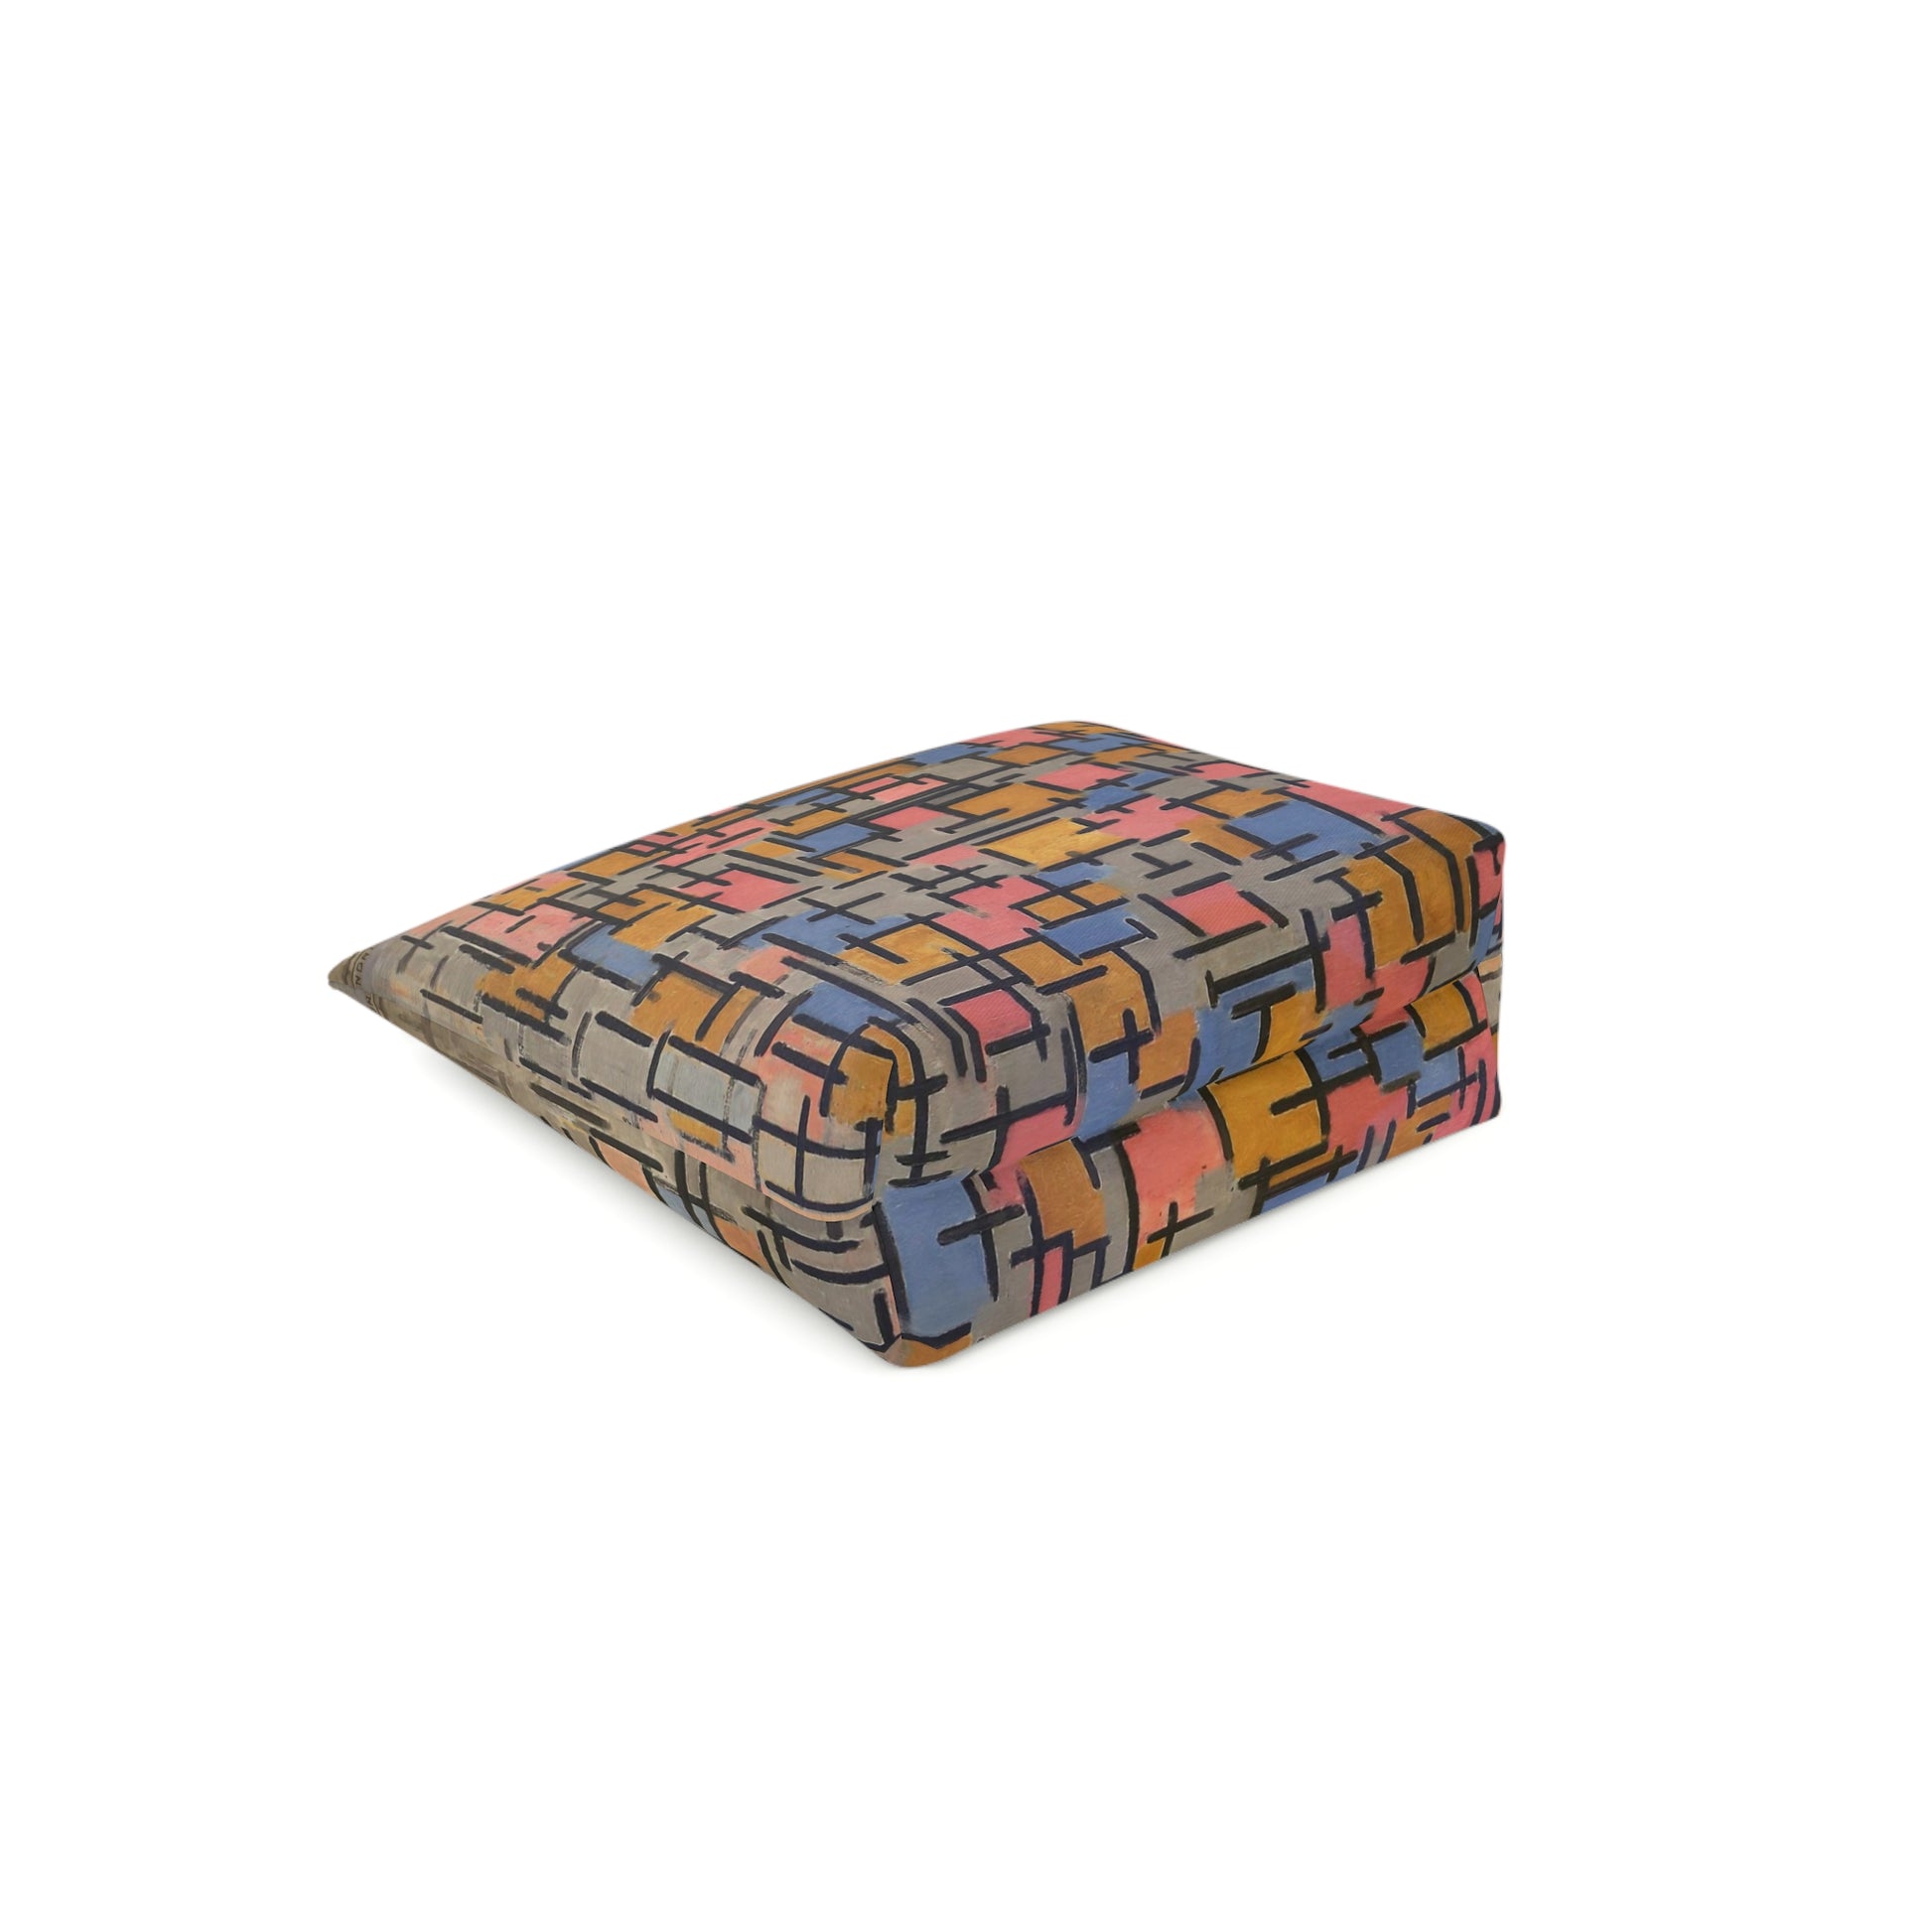 a multicolored box cushion on a white background